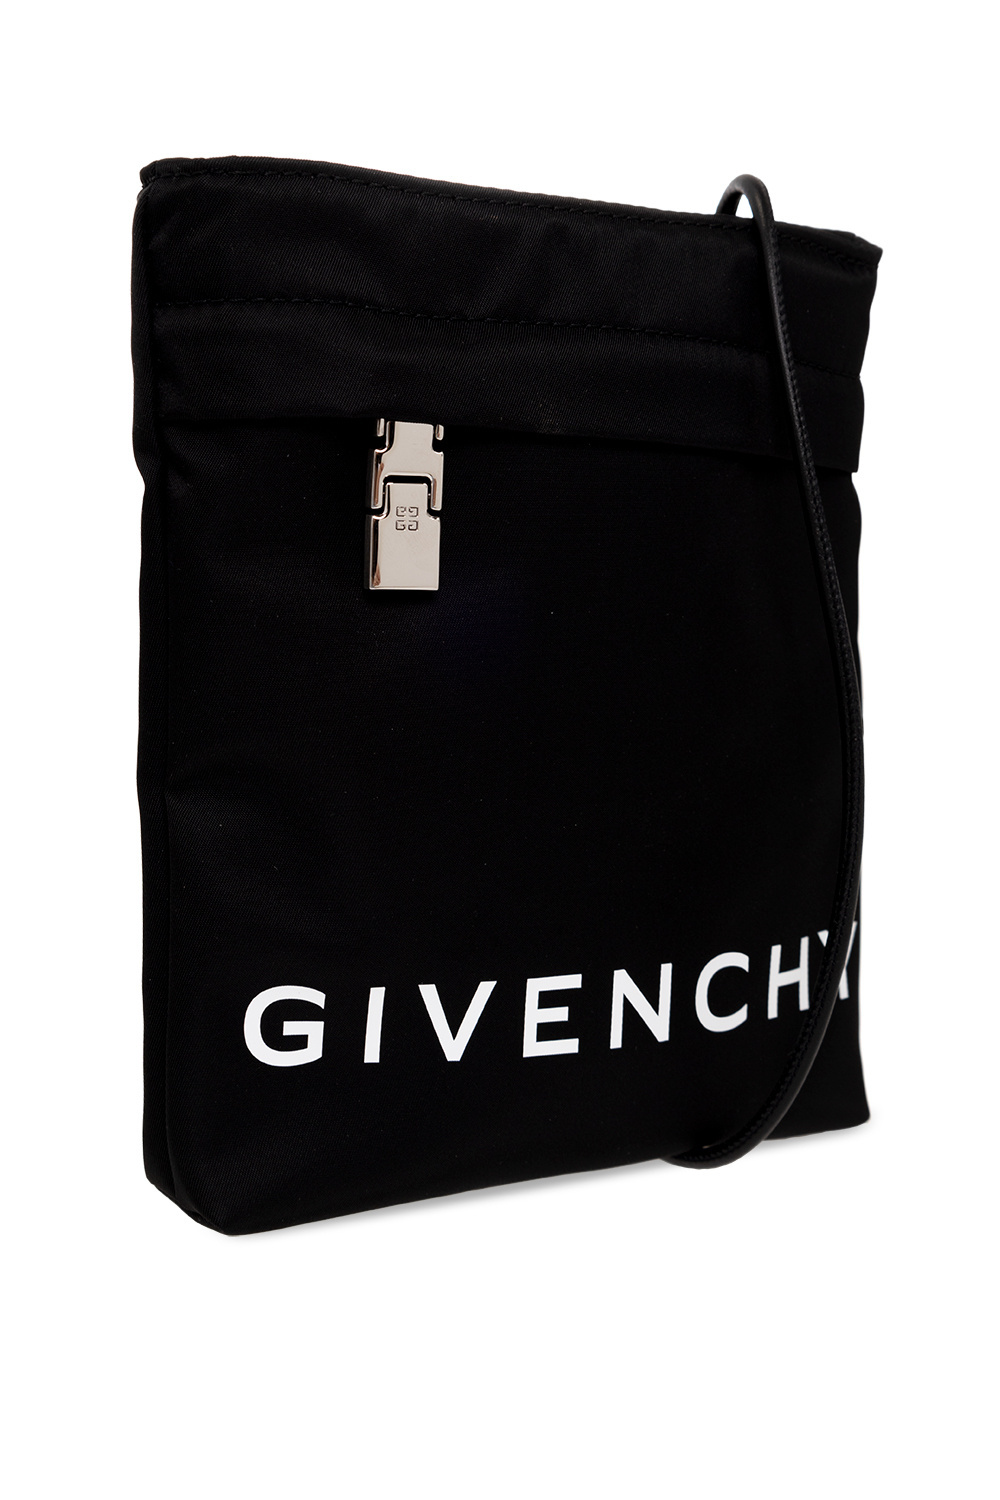 Givenchy givenchy 4g high rise stretch knit leggings